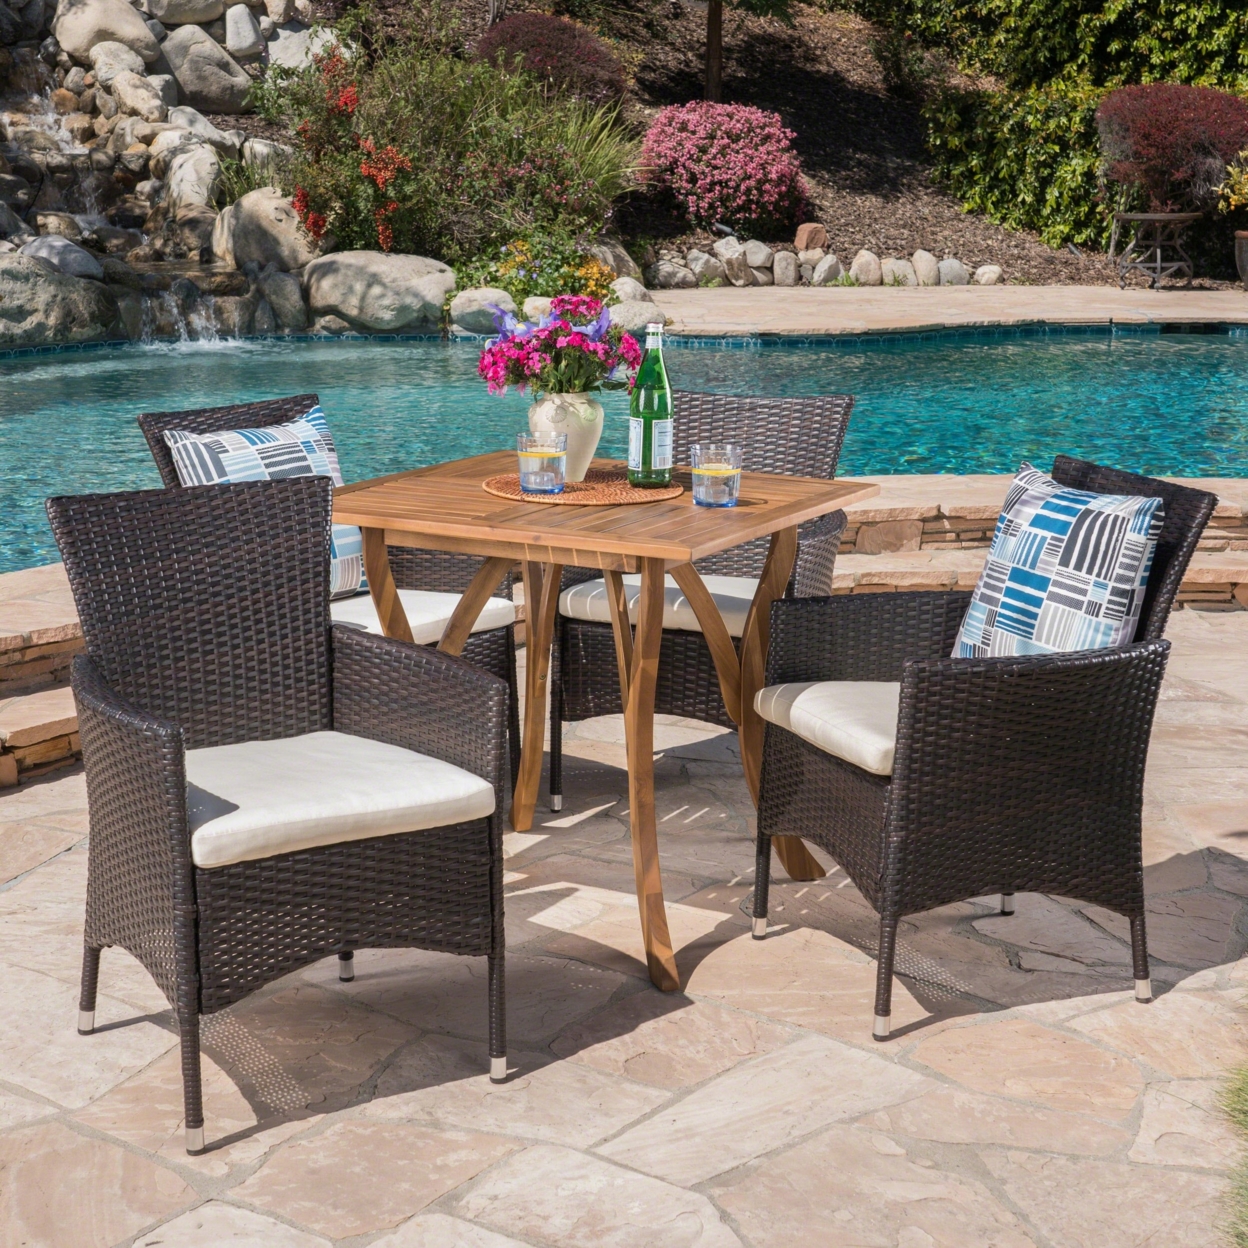 Arthur Outdoor 5 Piece Acacia Wood/ Wicker Dining Set With Cushions, Teak Finish And Multibrown With Beige